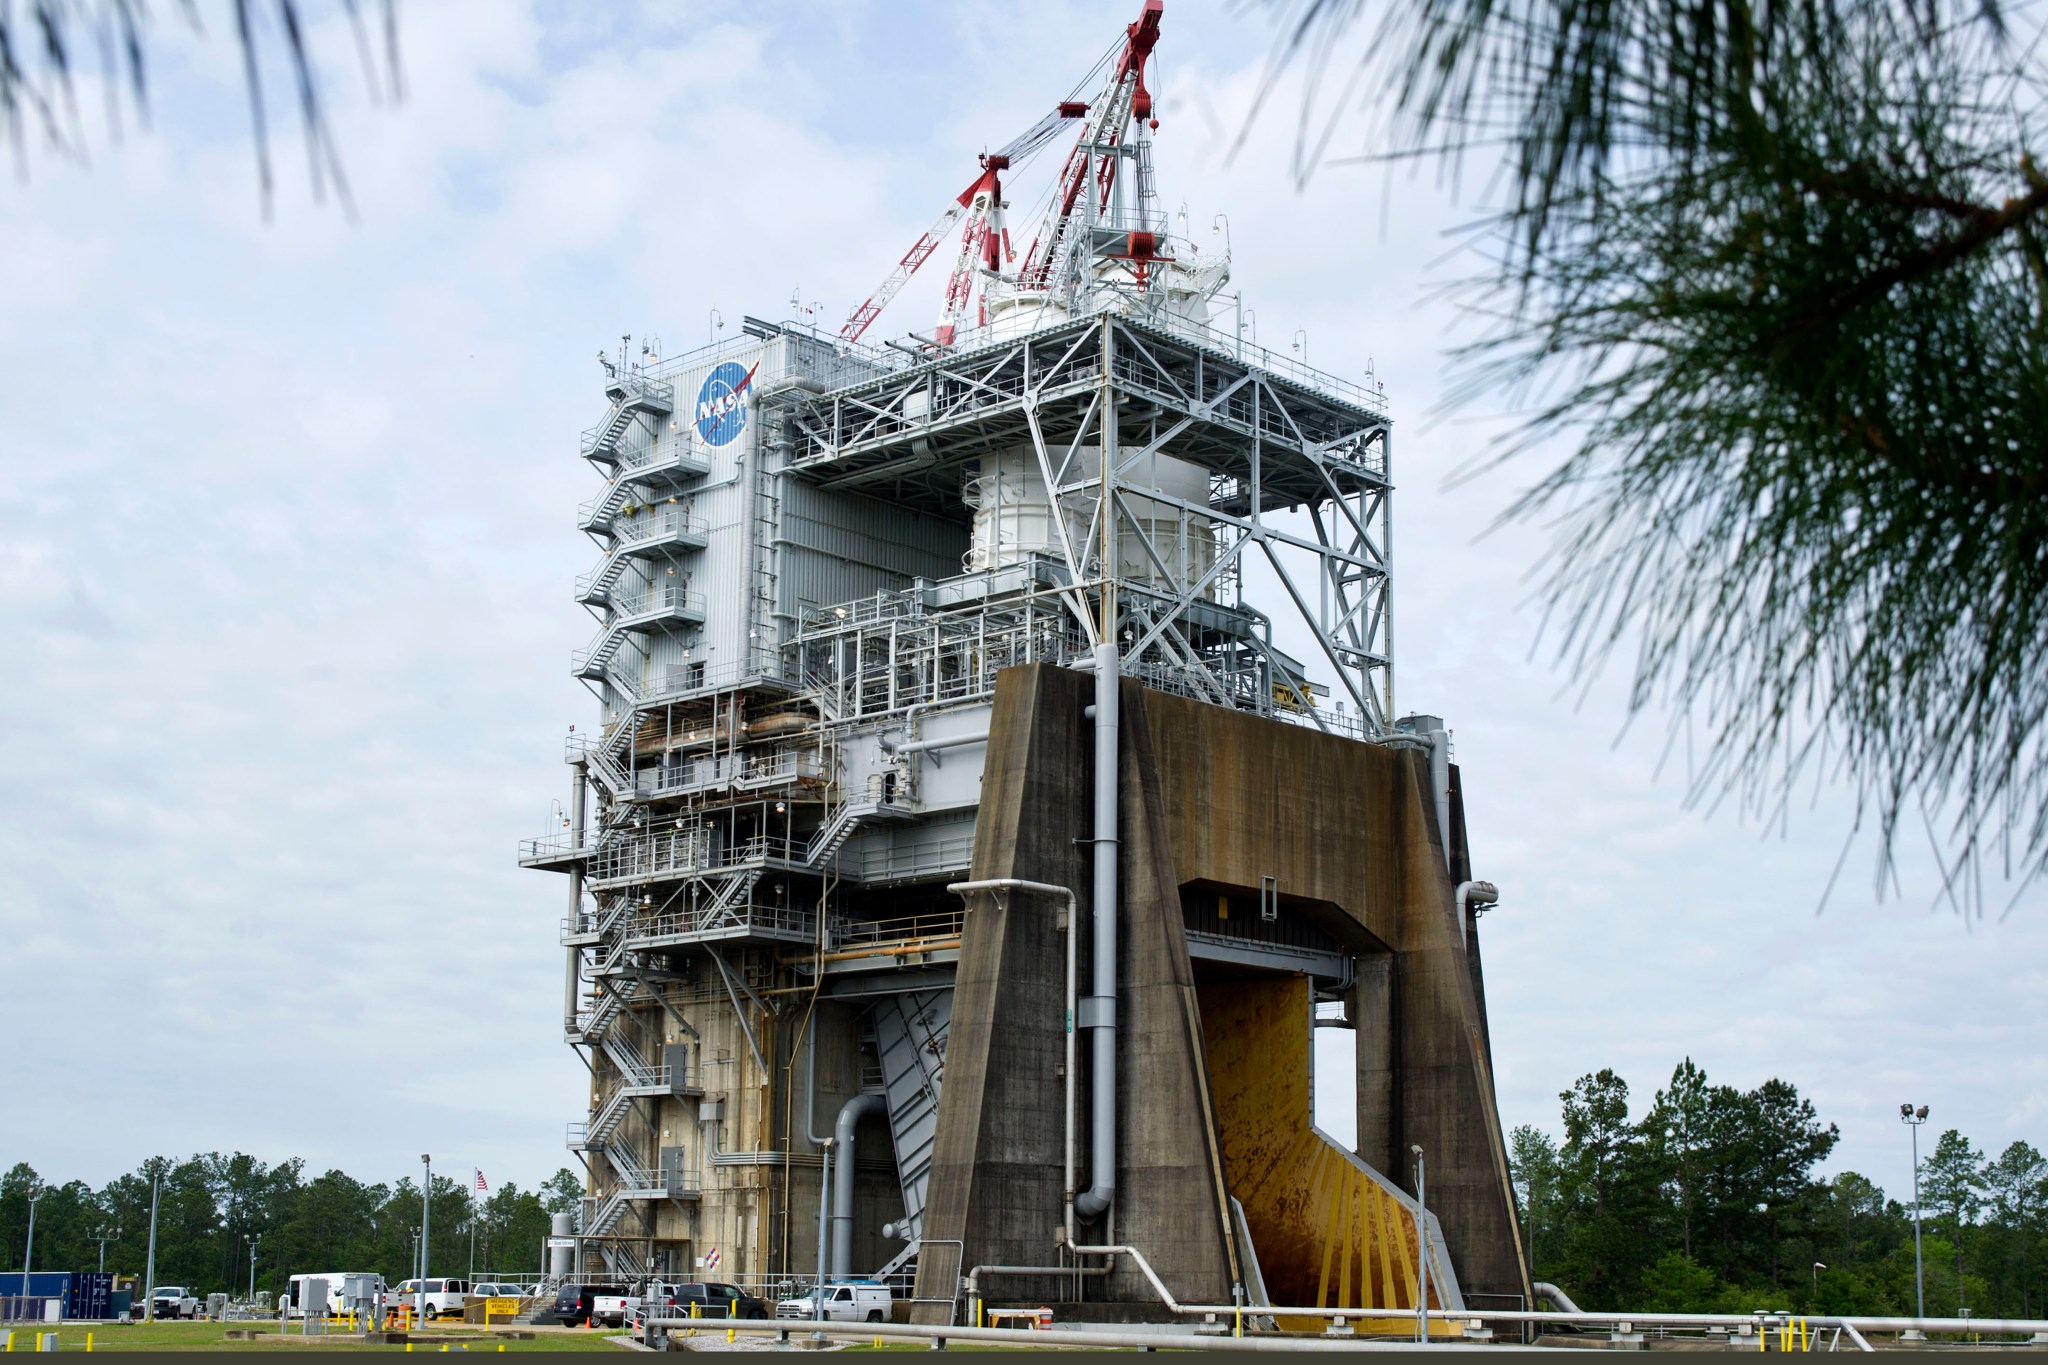 View of the Fred Haise Test Stand at NASA Stennis